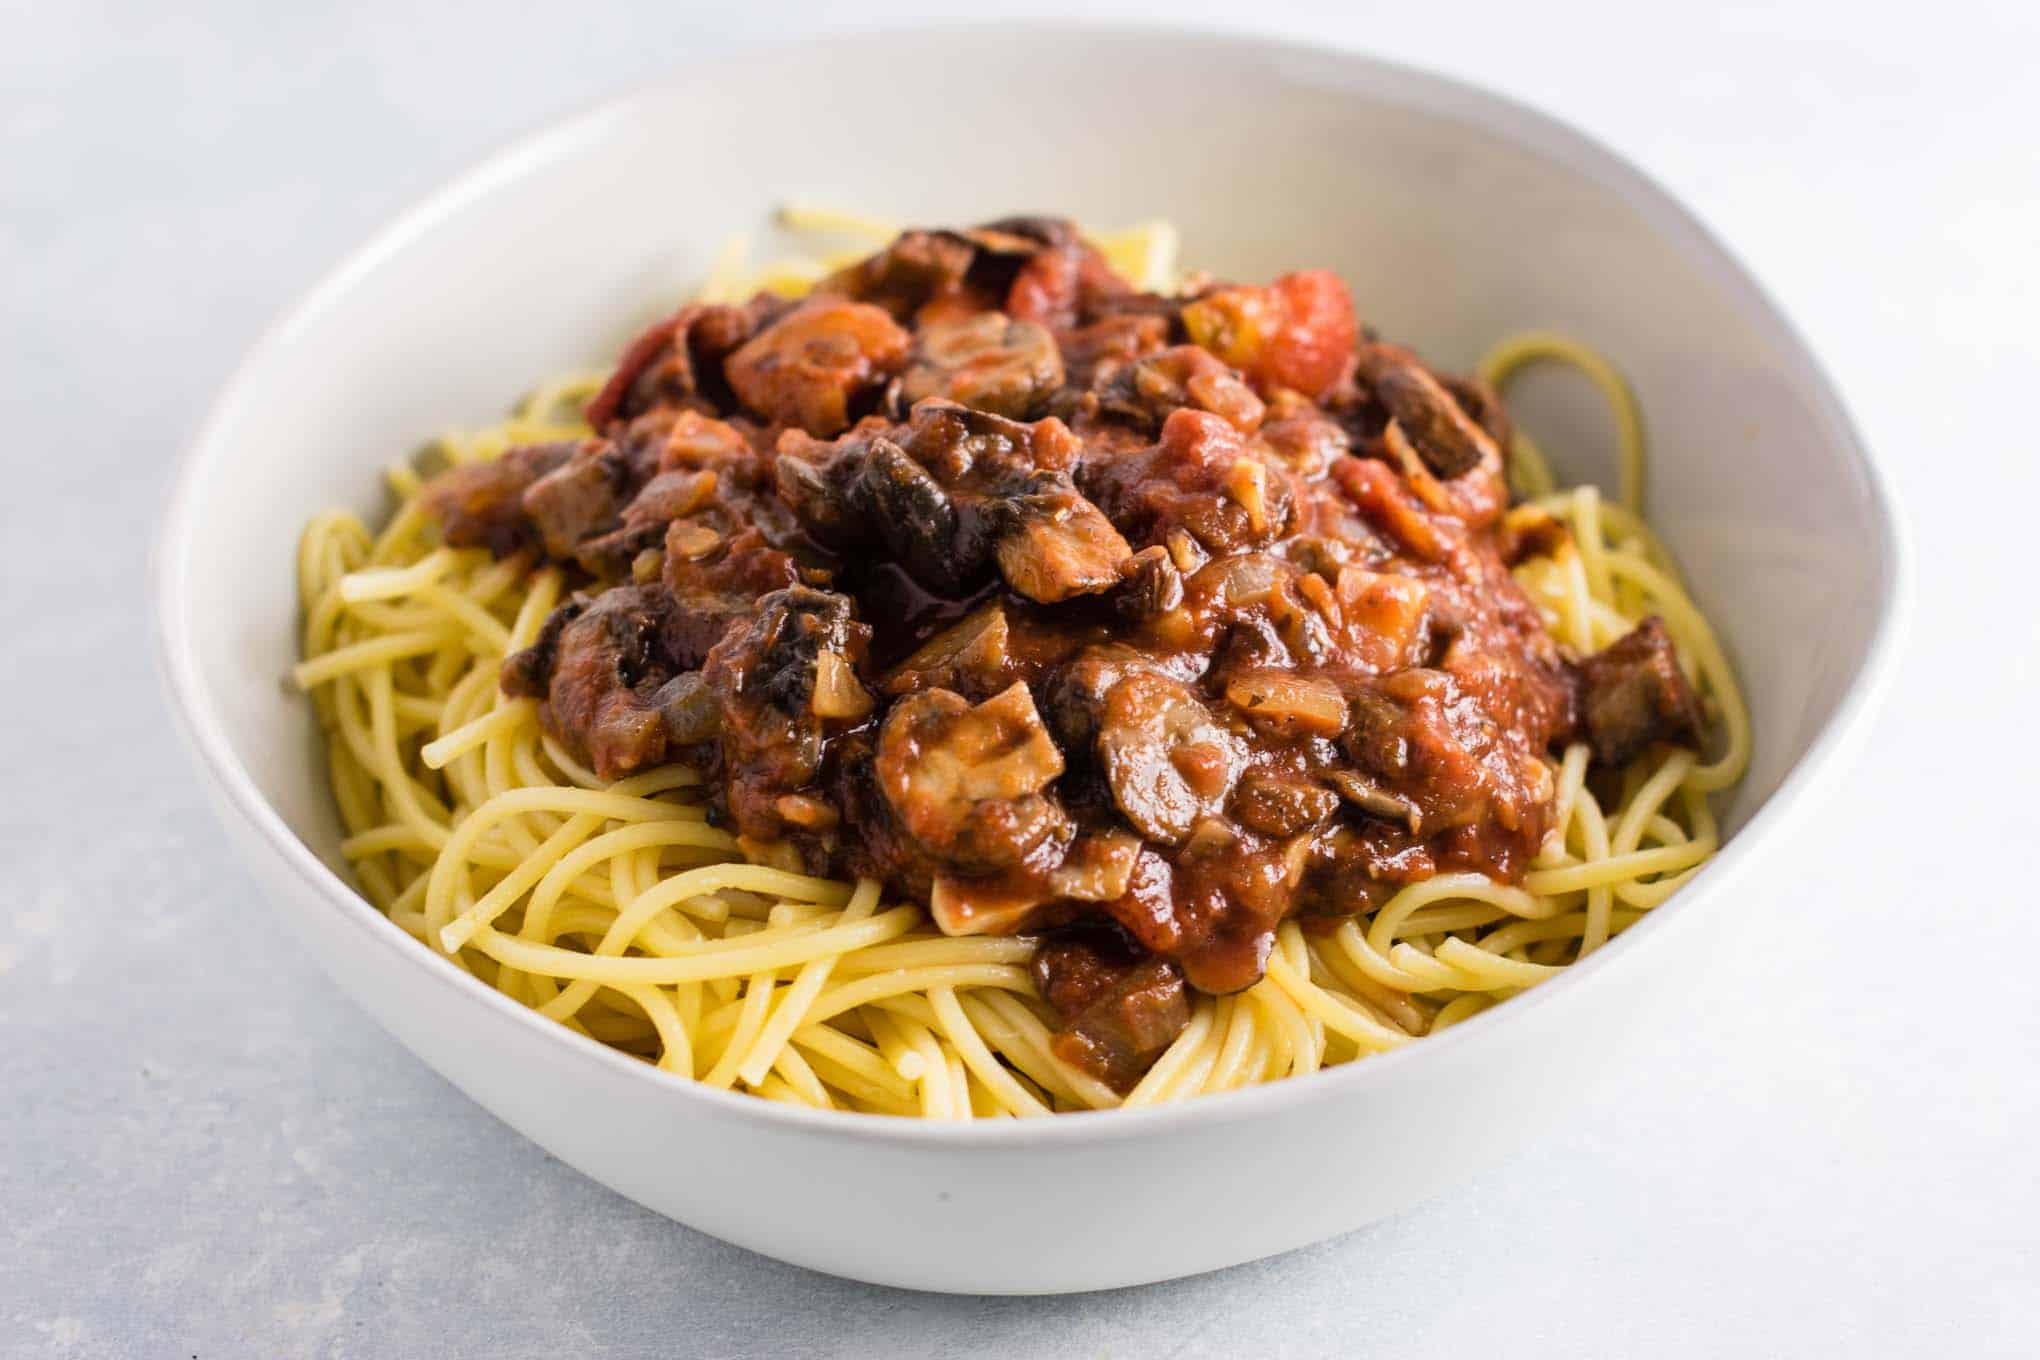 hearty vegetarian spaghetti sauce over white spaghetti noodles in a bowl